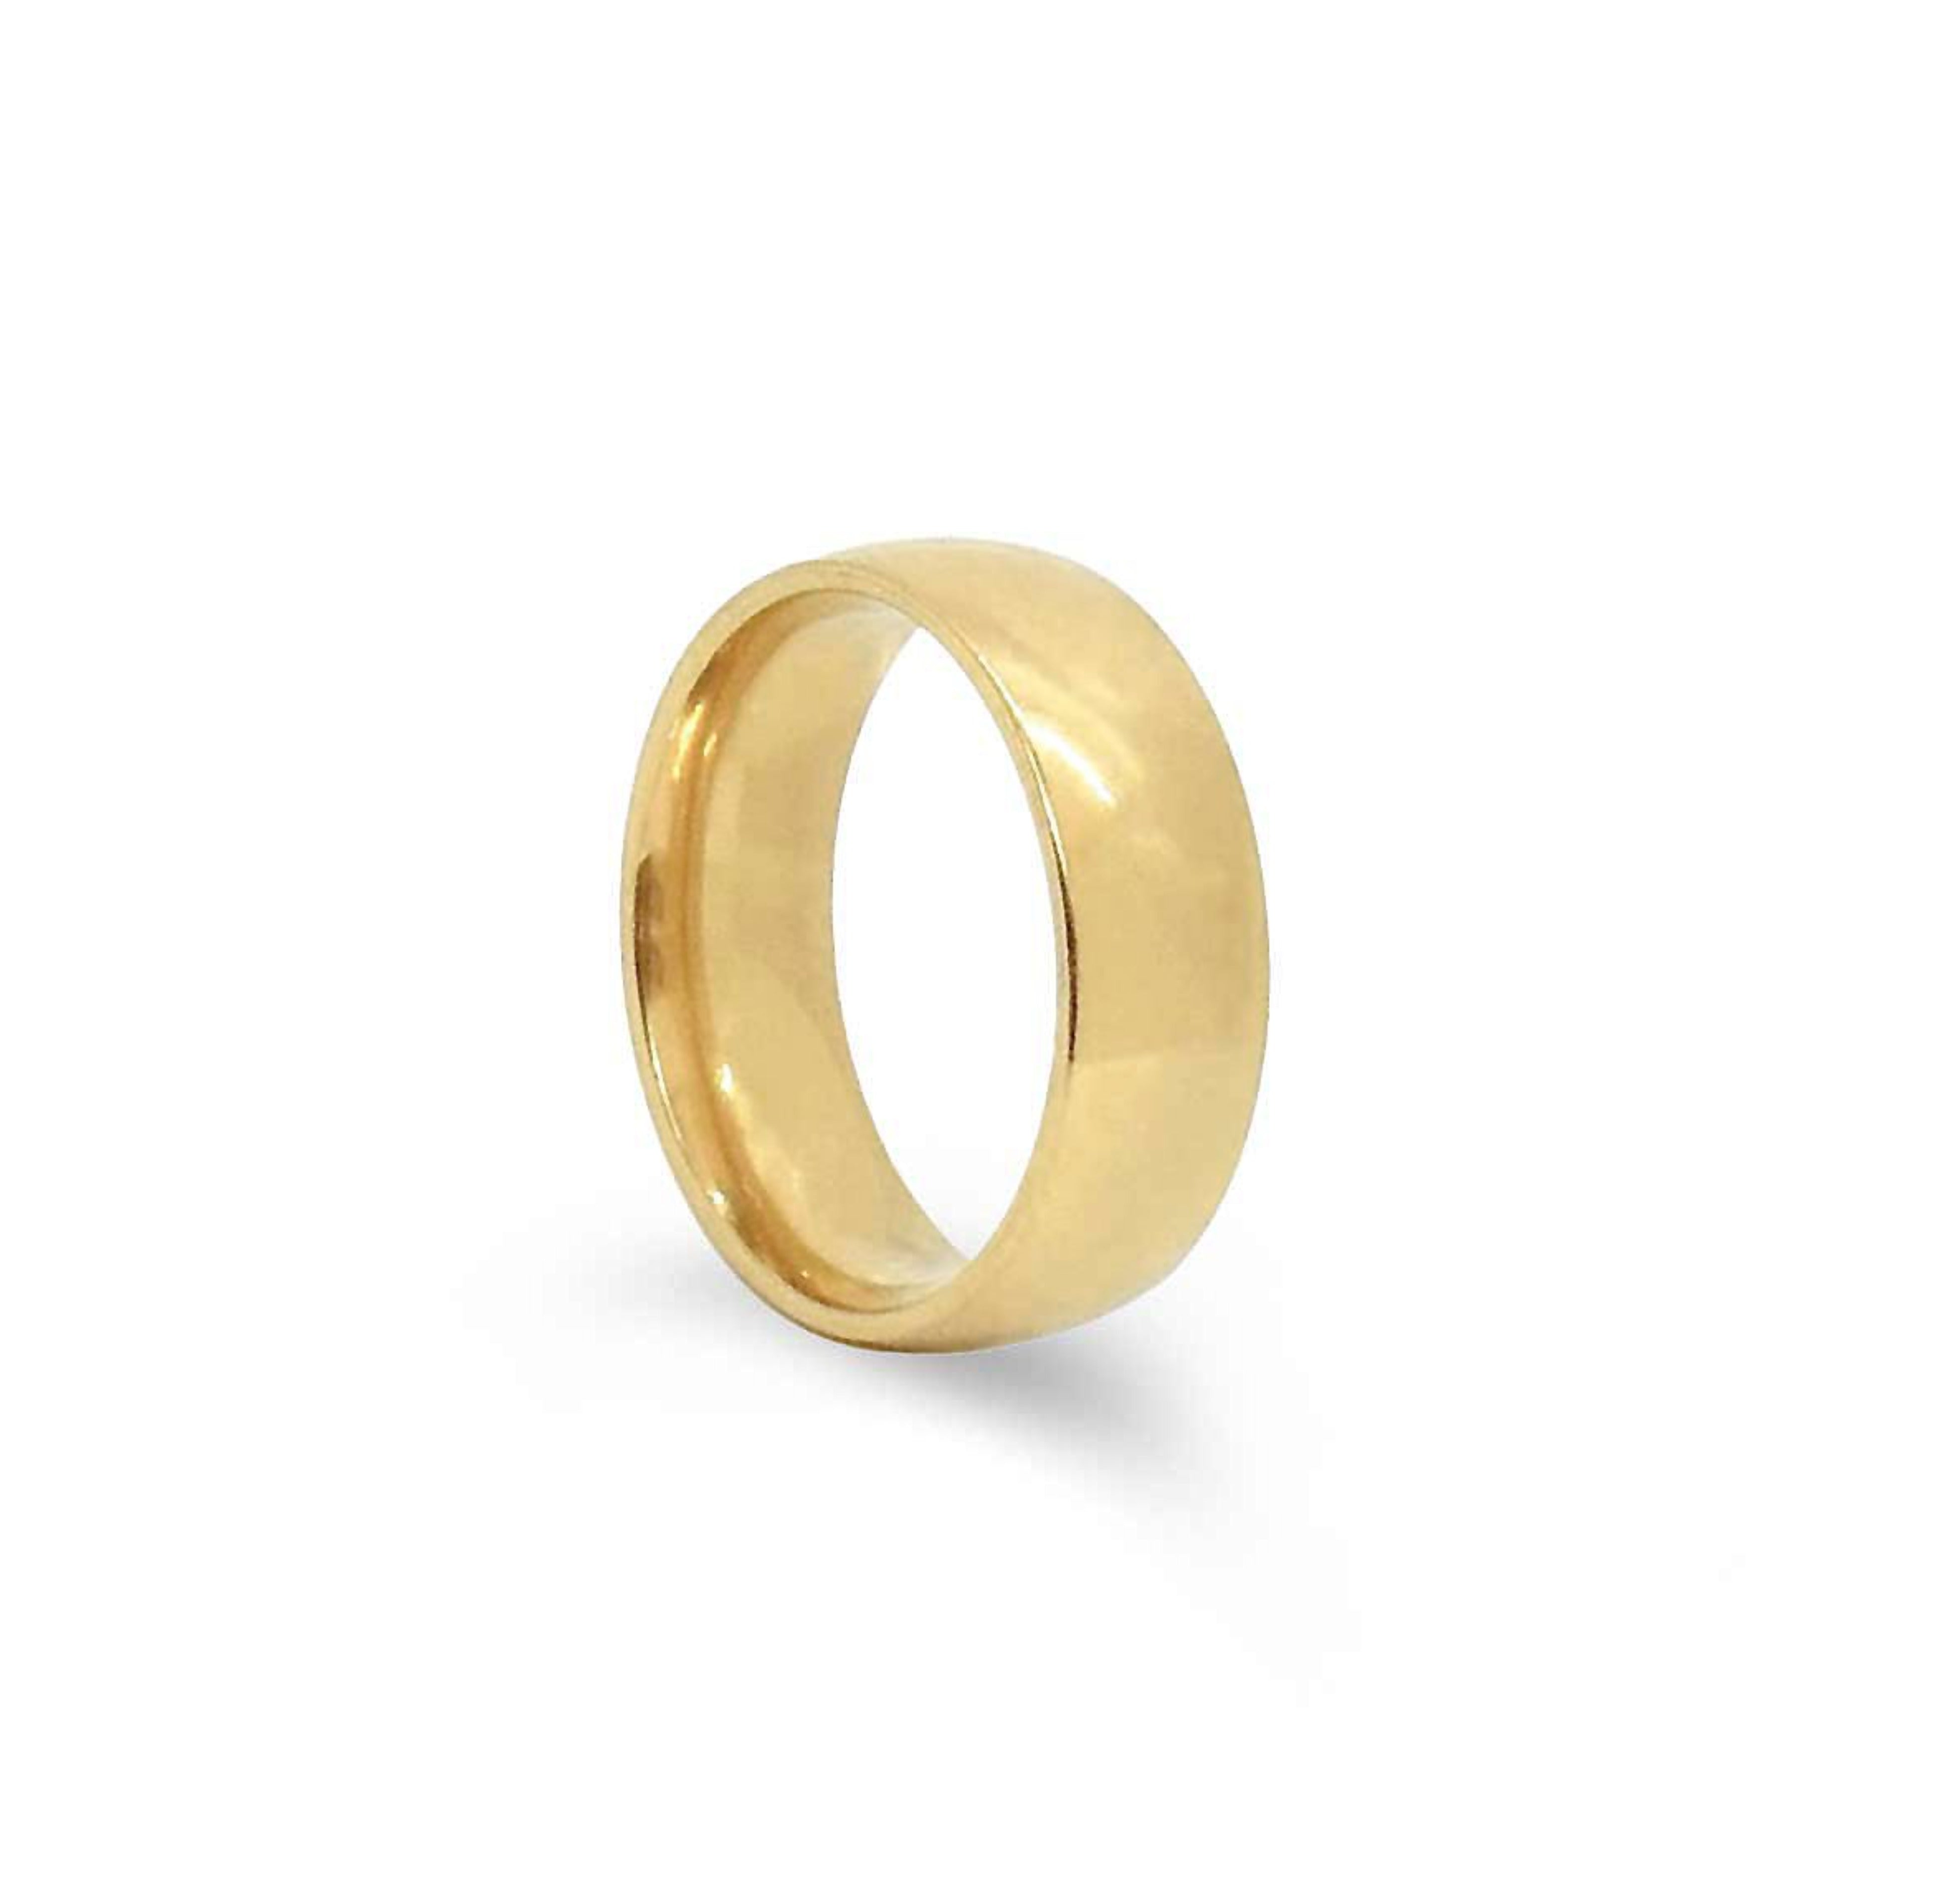 THICK GOLD RING BAND